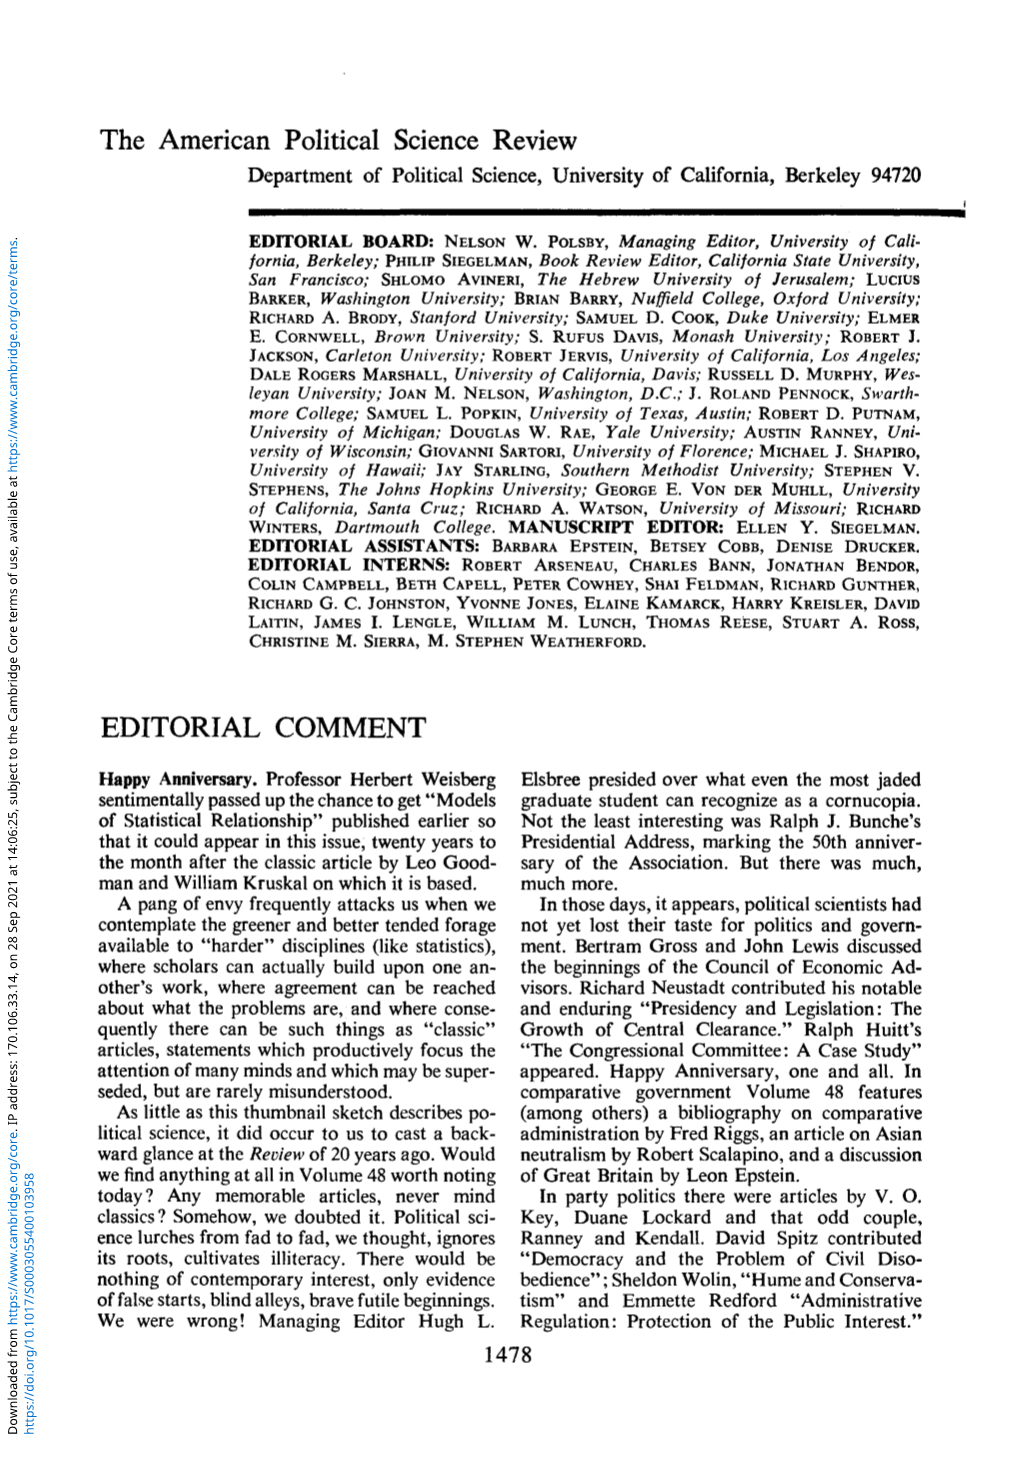 The American Political Science Review EDITORIAL COMMENT